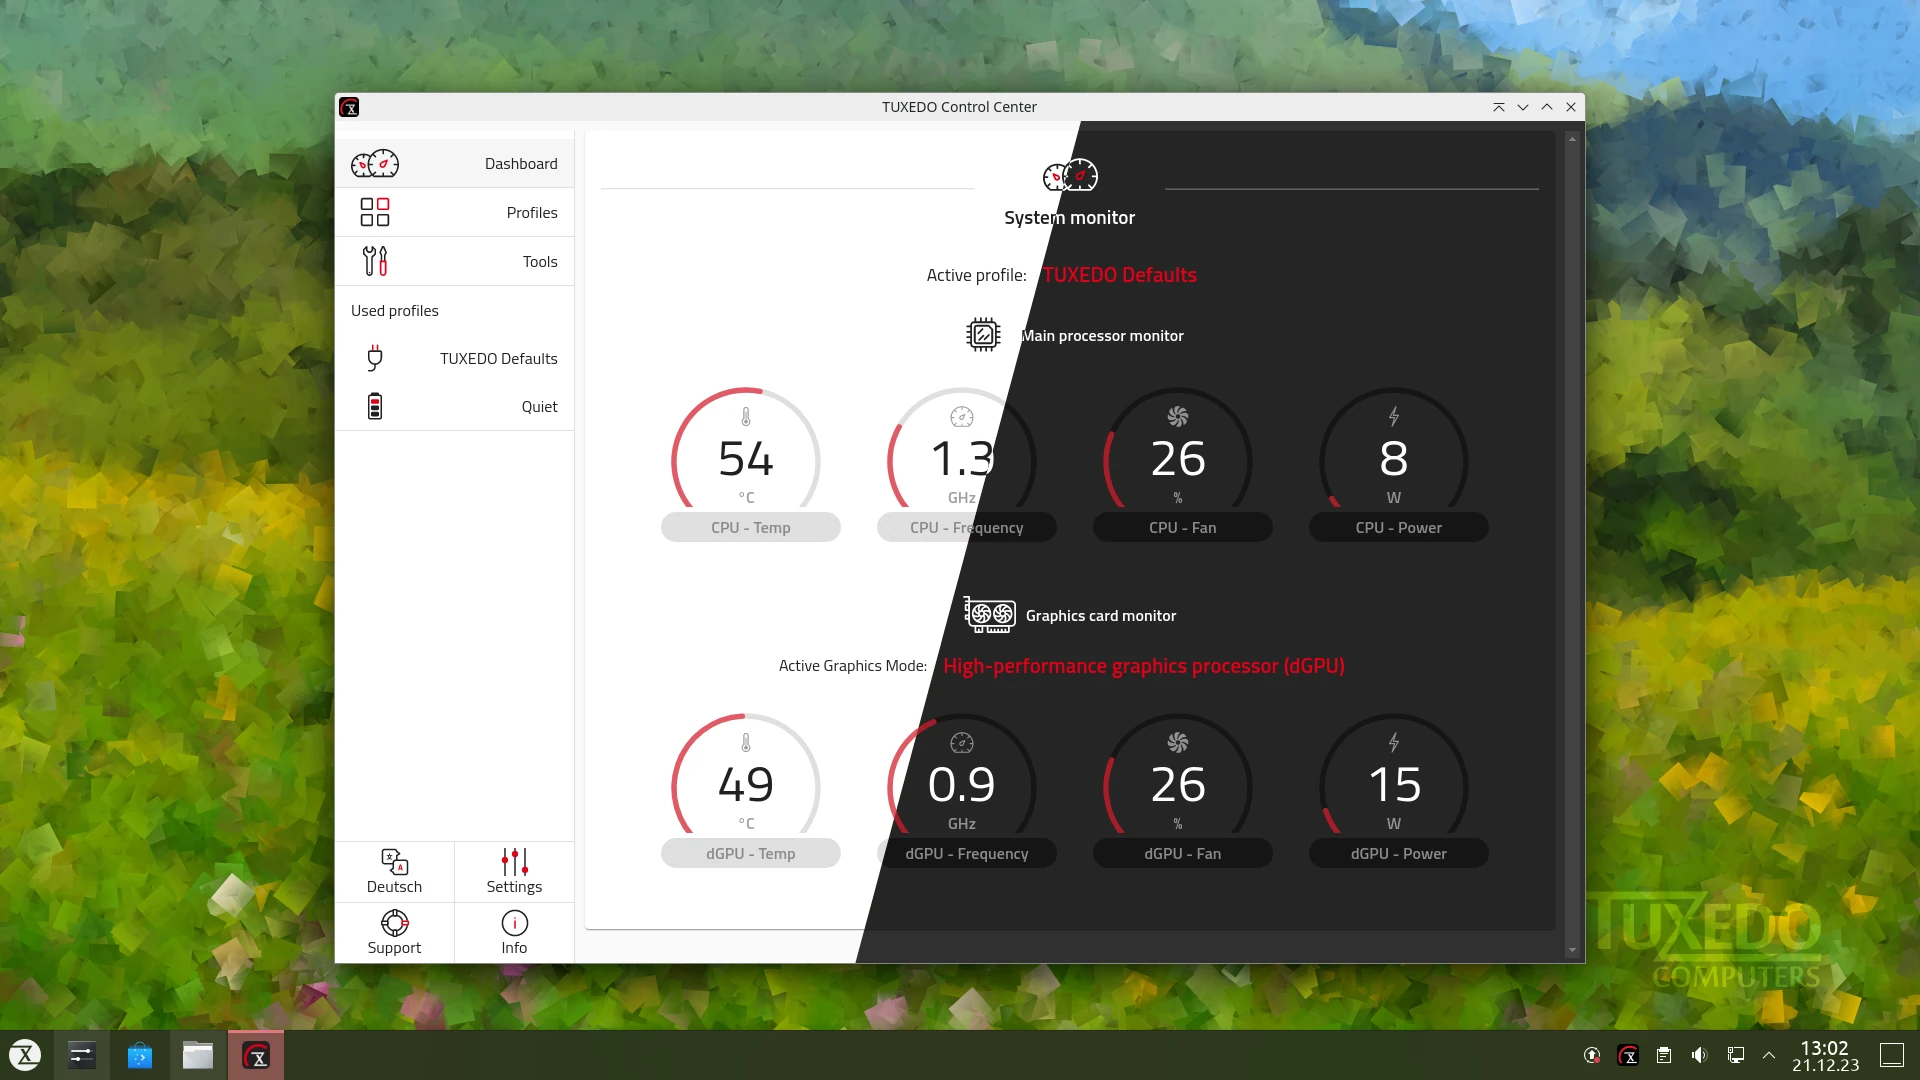 TUXEDO Control Center 2.1 Released with Exciting New Functions